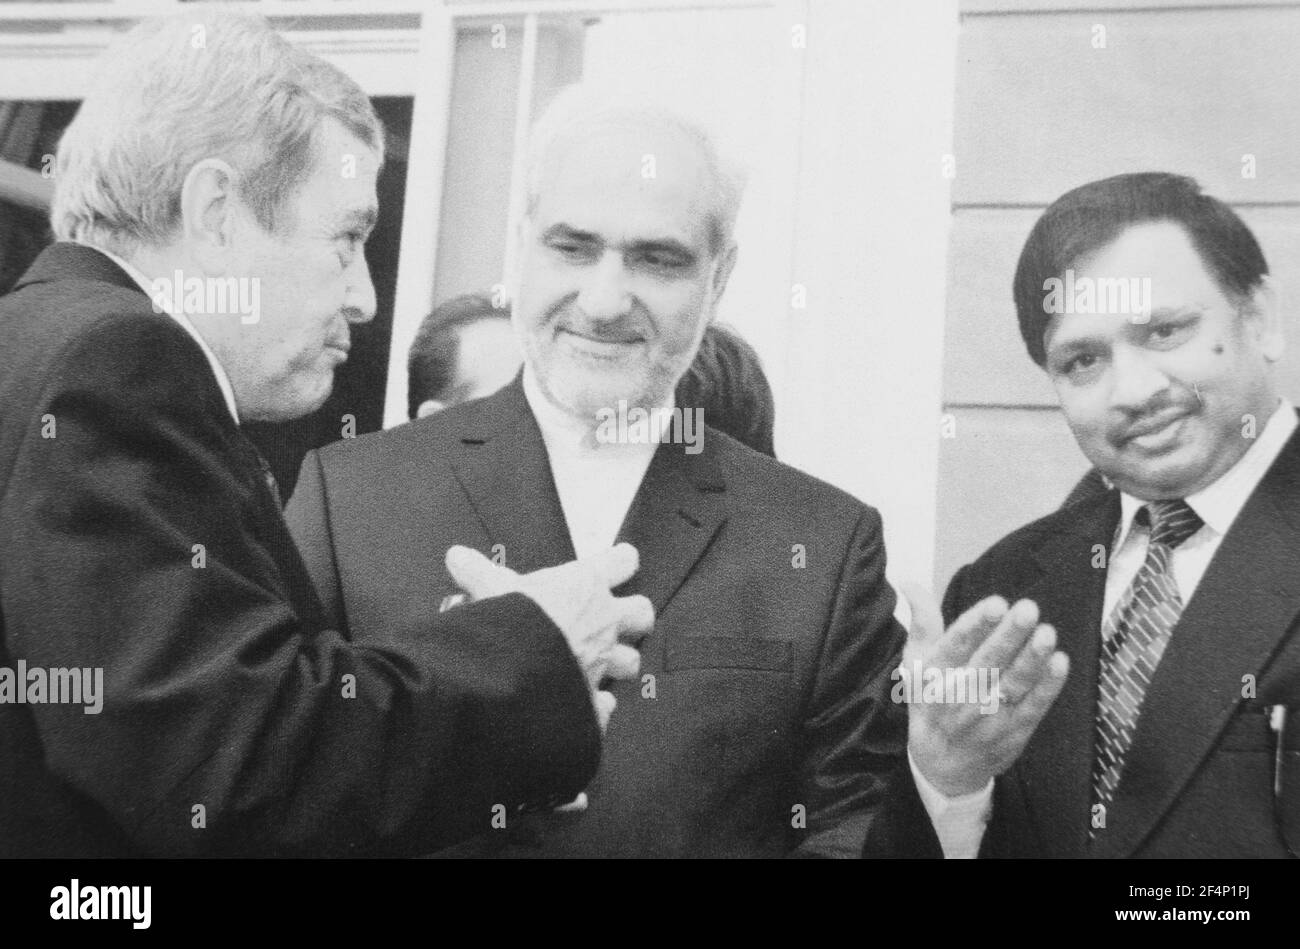 Switzerland: The Iranian embassador in Bern Alireza Salari invited Irans Foreign Minister Mohammed Dschawad Sarif and a lot of diplomats from all over Stock Photo